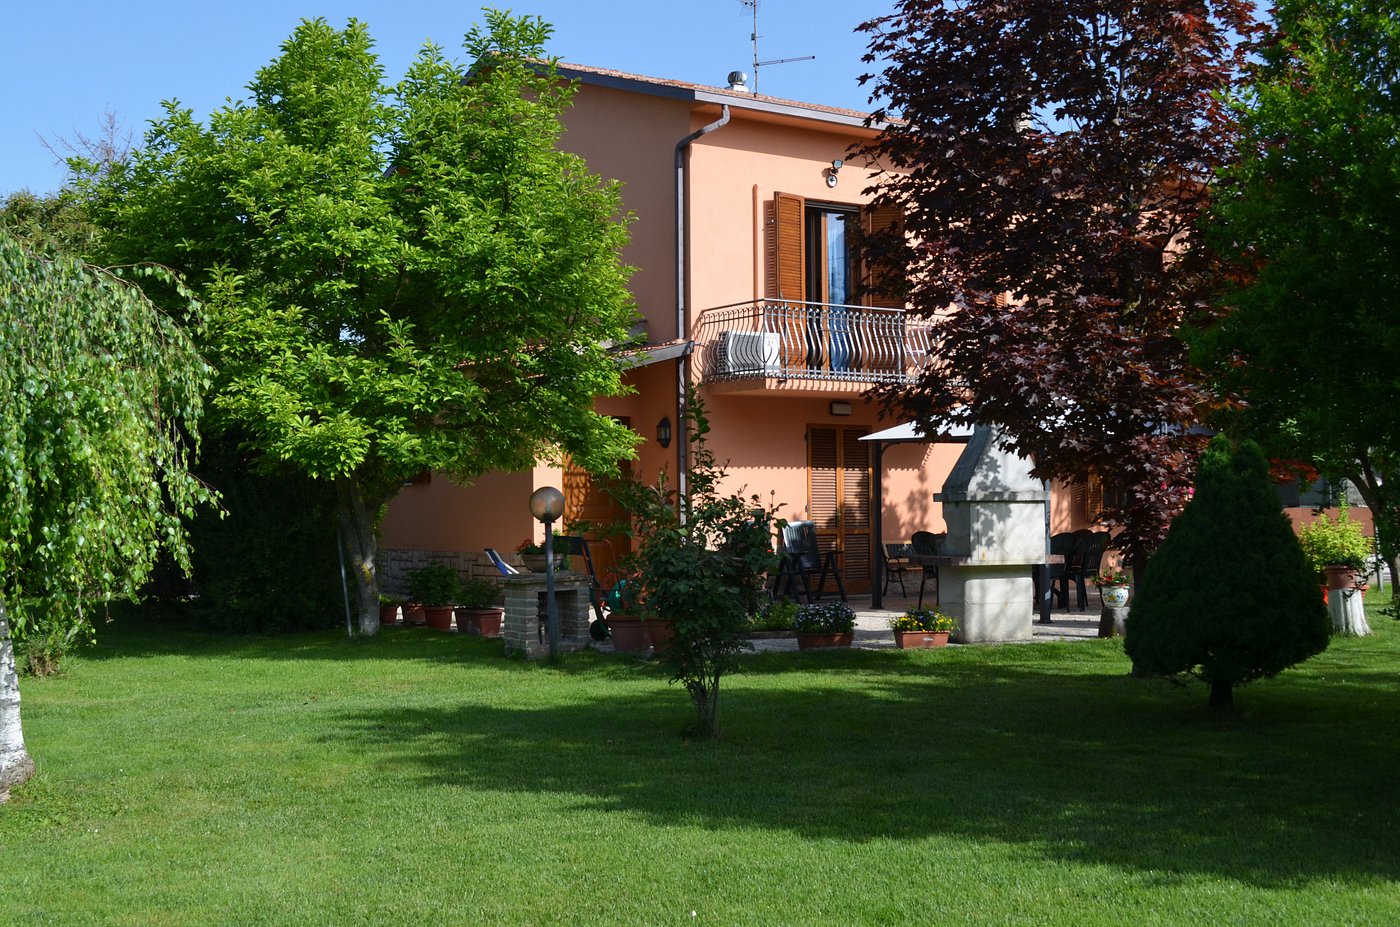 RESIDENZA DI CAMPAGNA - Prices & Guest house Reviews (Rivotorto, Italy)